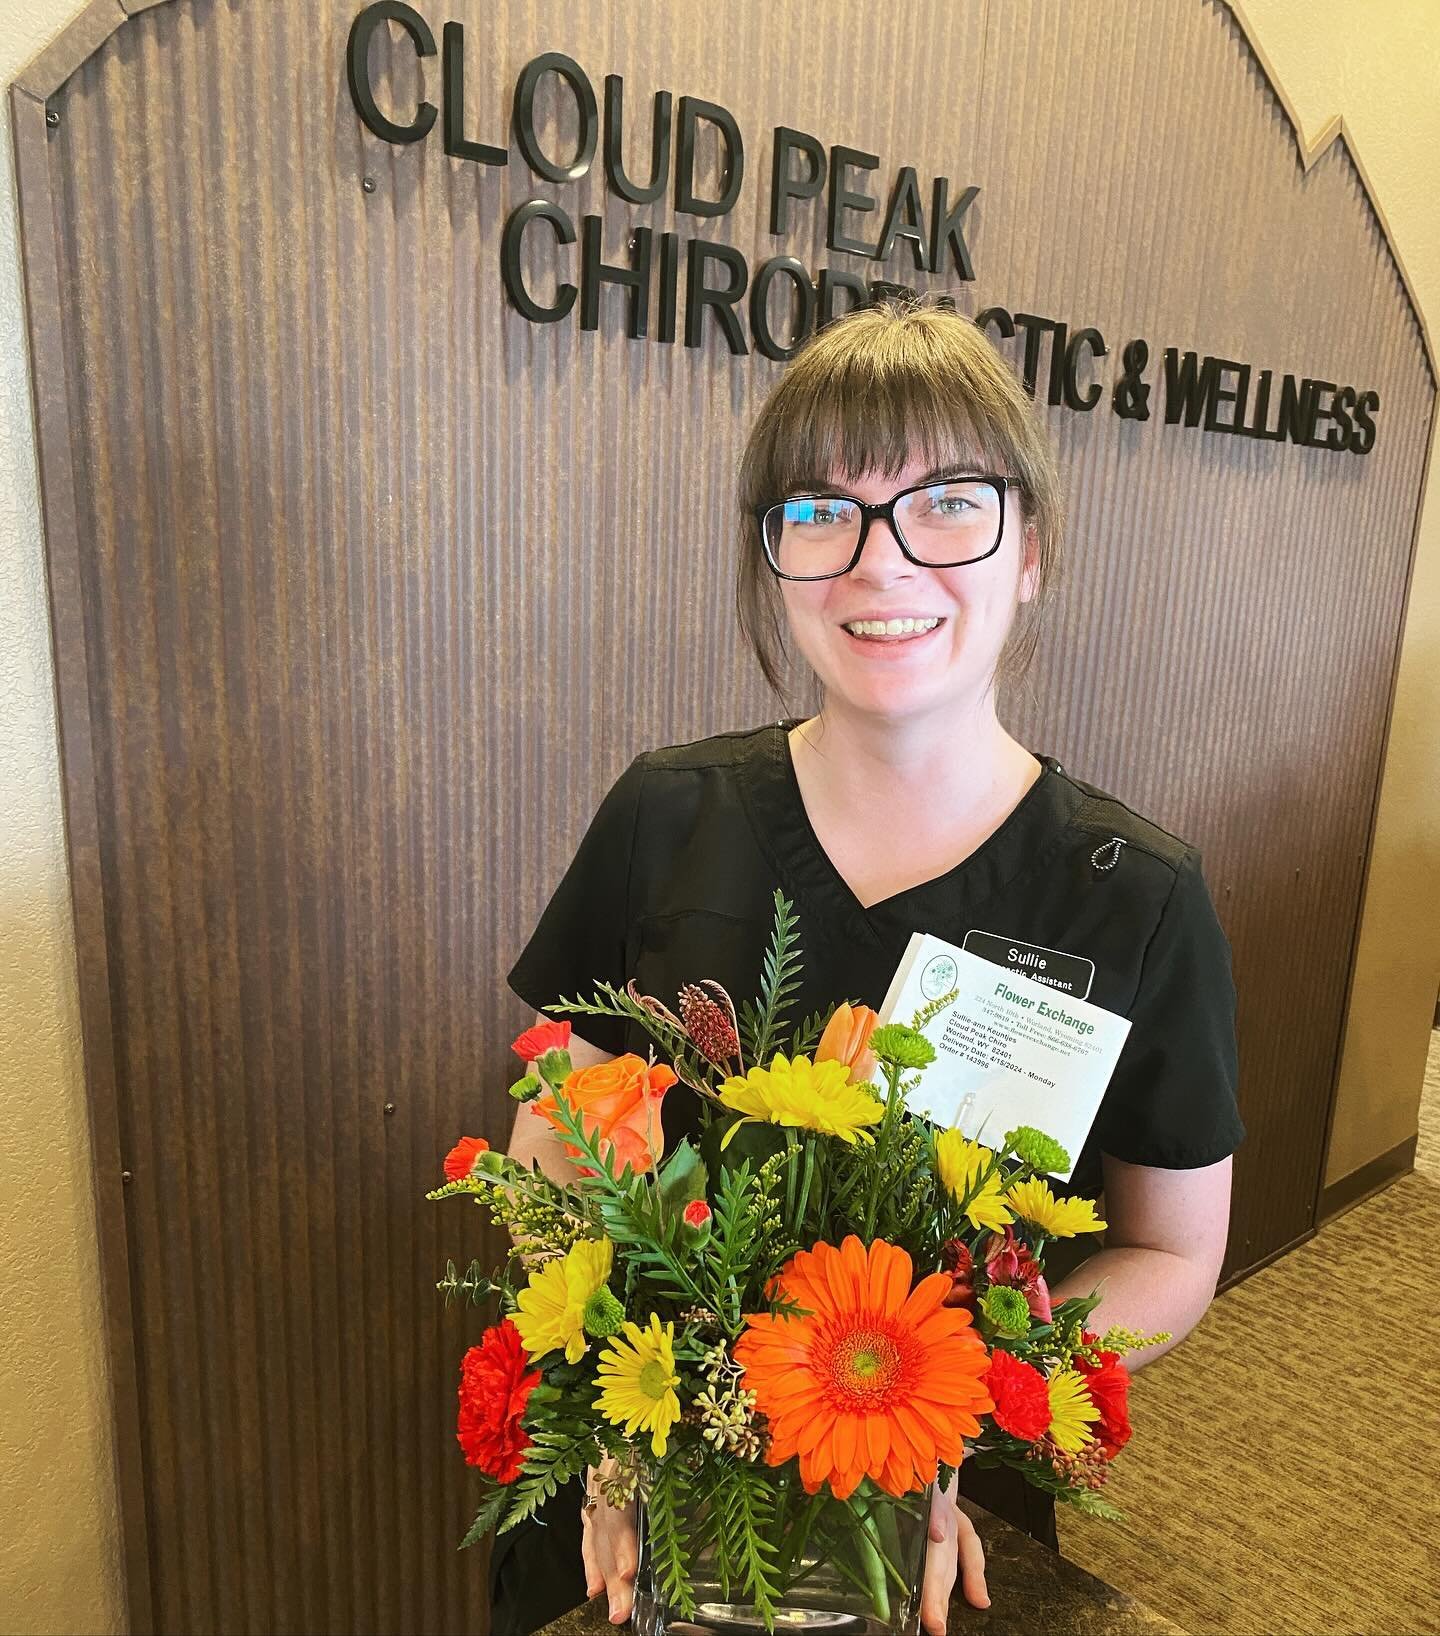 We&rsquo;re celebrating Sullie-Ann Keuntjes today because she&rsquo;s been with us for one year! Sullie we are so grateful for the warmth, compassion and friendliness that you bring to our team and our patients. Thanks for always staying one step ahe